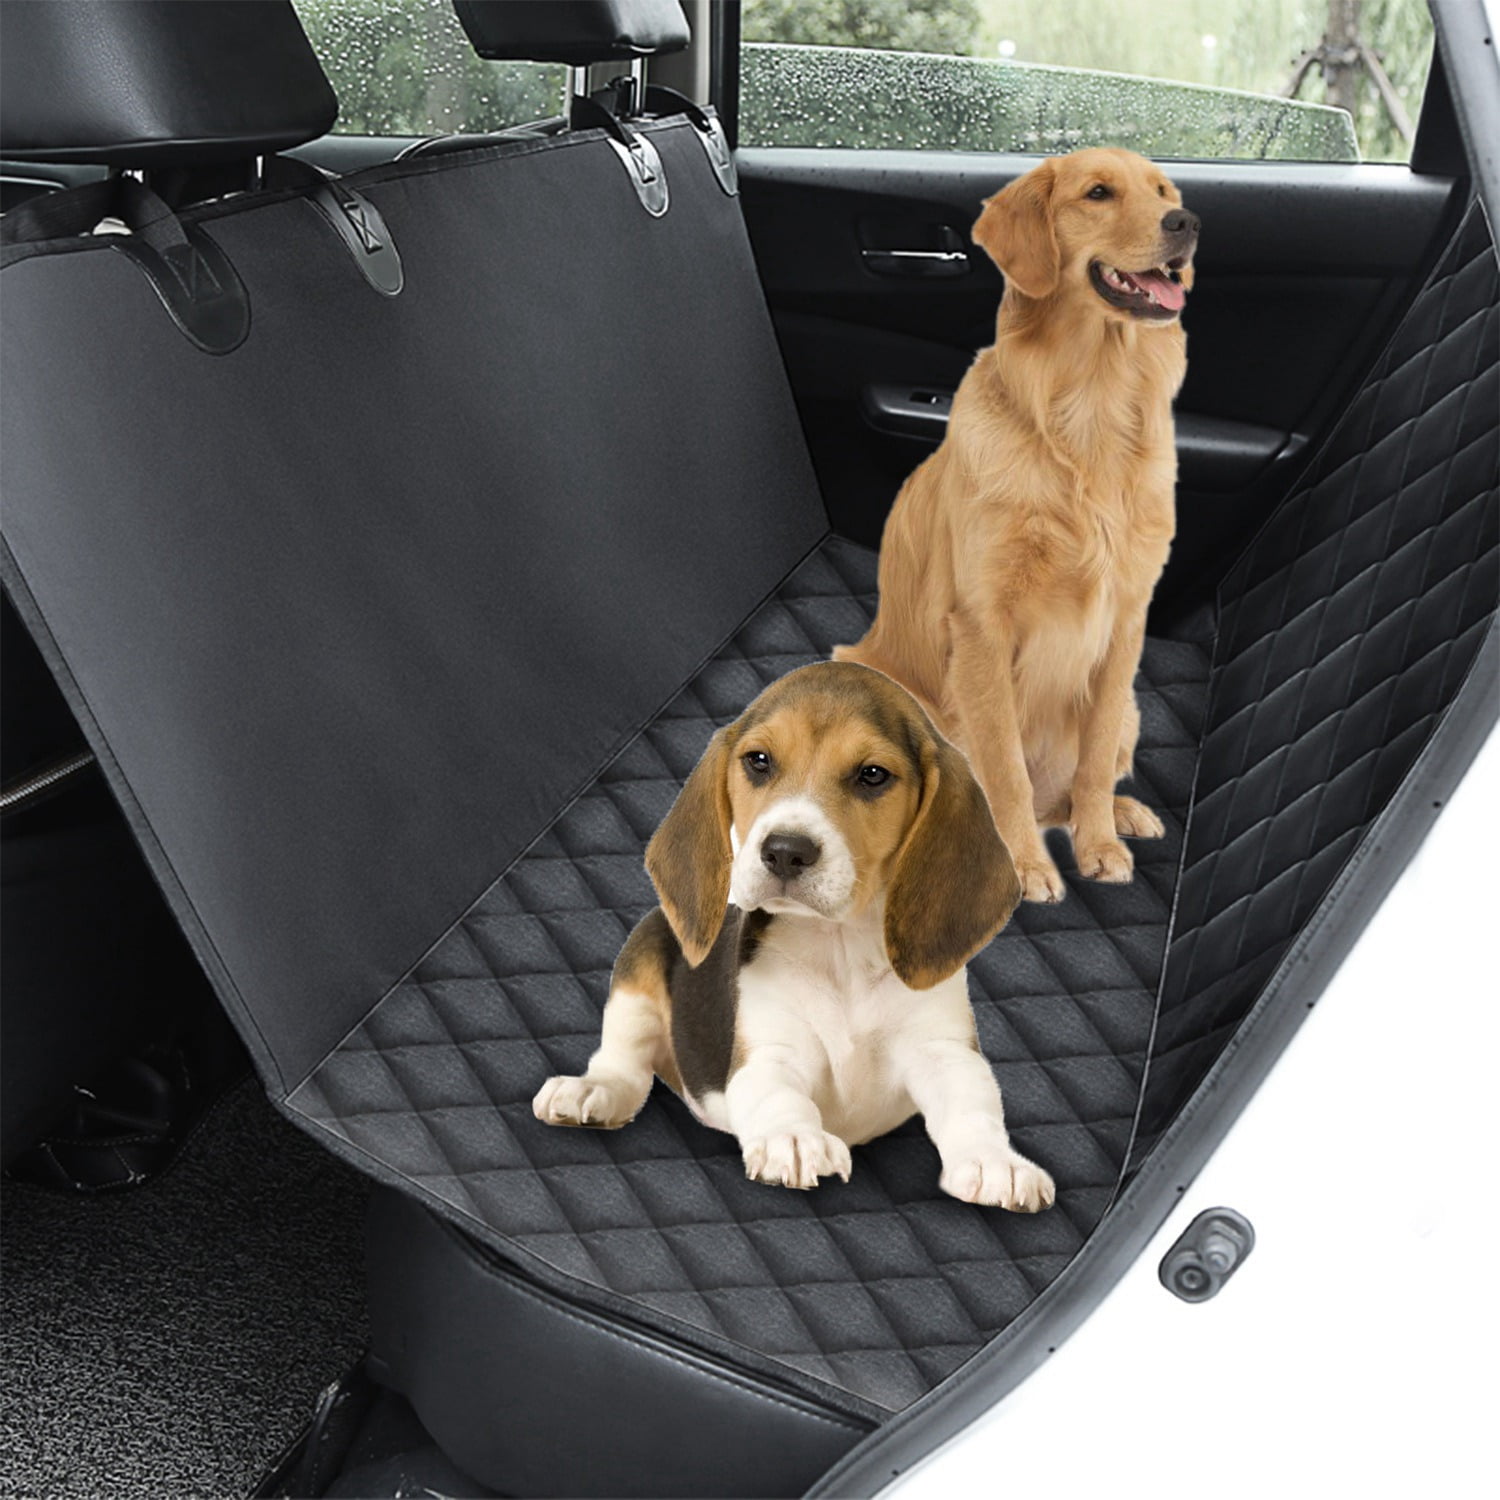 zootop Dog Car Seats Black with Bone & Paw Prints Portable Oxford Breathable Dog Car Seat Waterproof & Foldable Puppy Car Seat with Seat Belt & Strong Padded Sides for Small Medium Pets